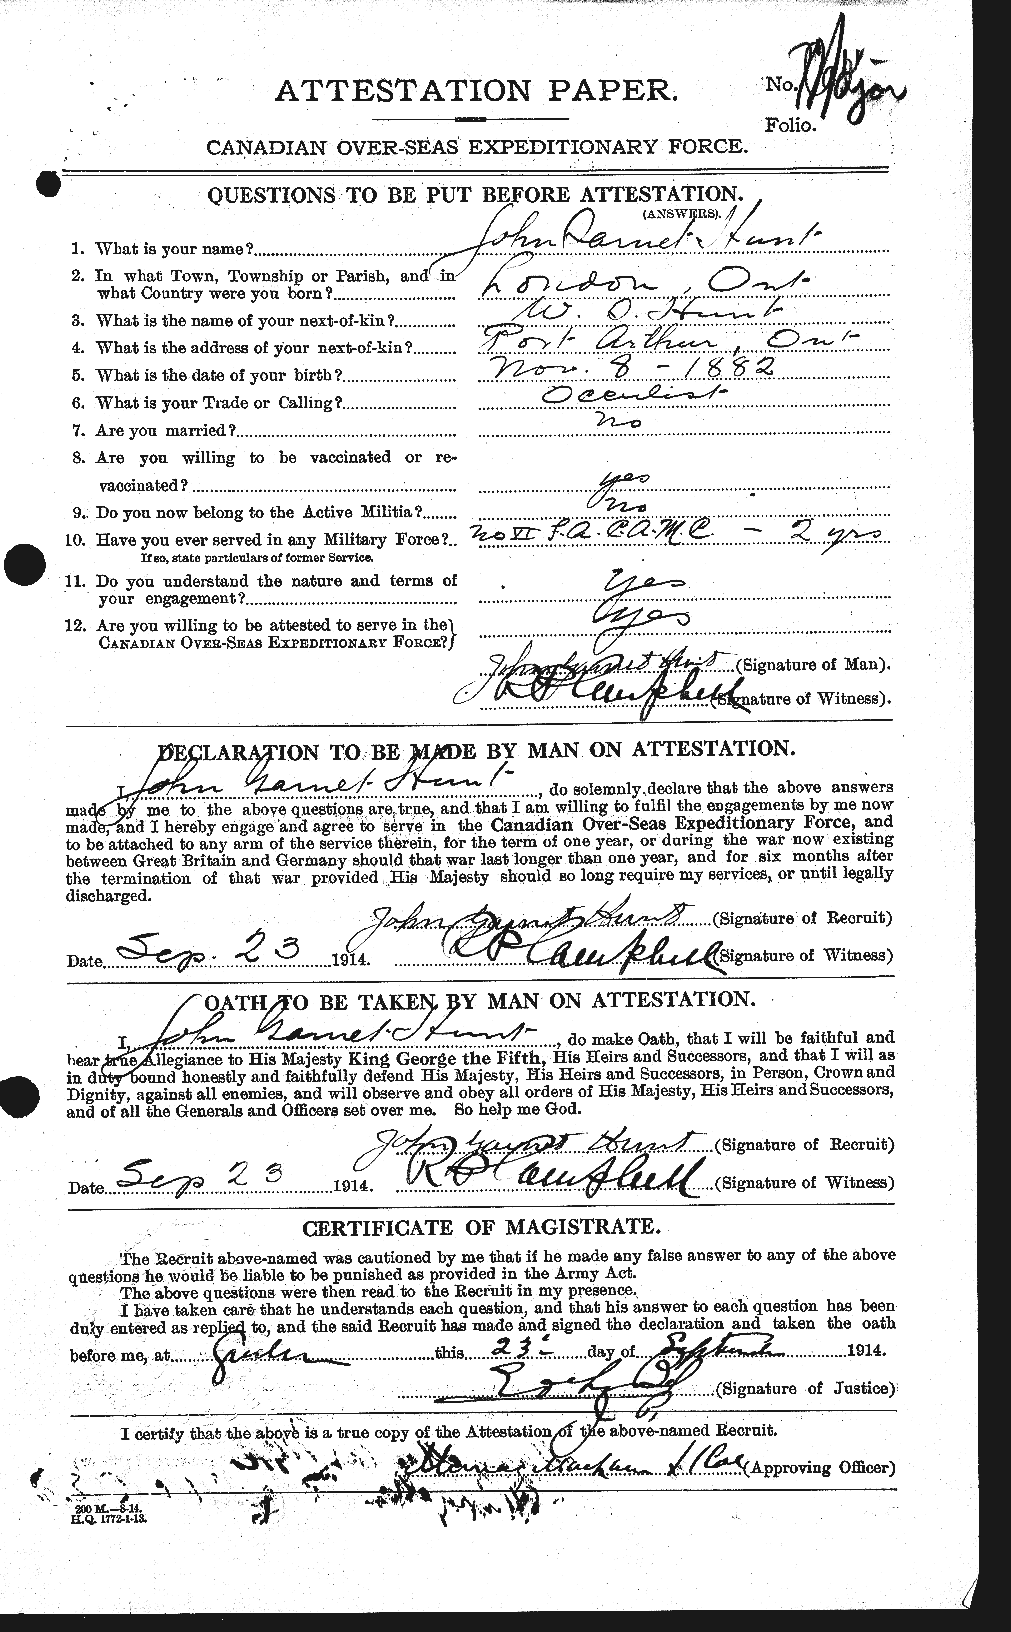 Personnel Records of the First World War - CEF 407630a